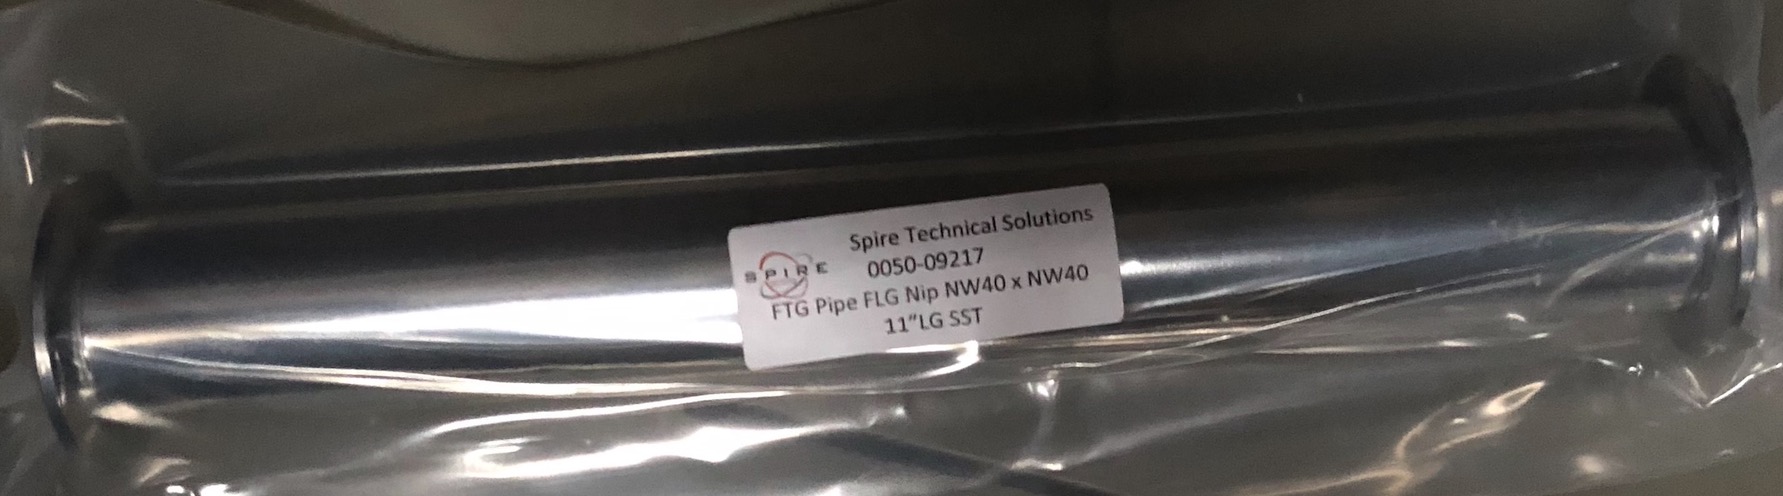 FTG Pipe Flg NW40 x NW40 11"